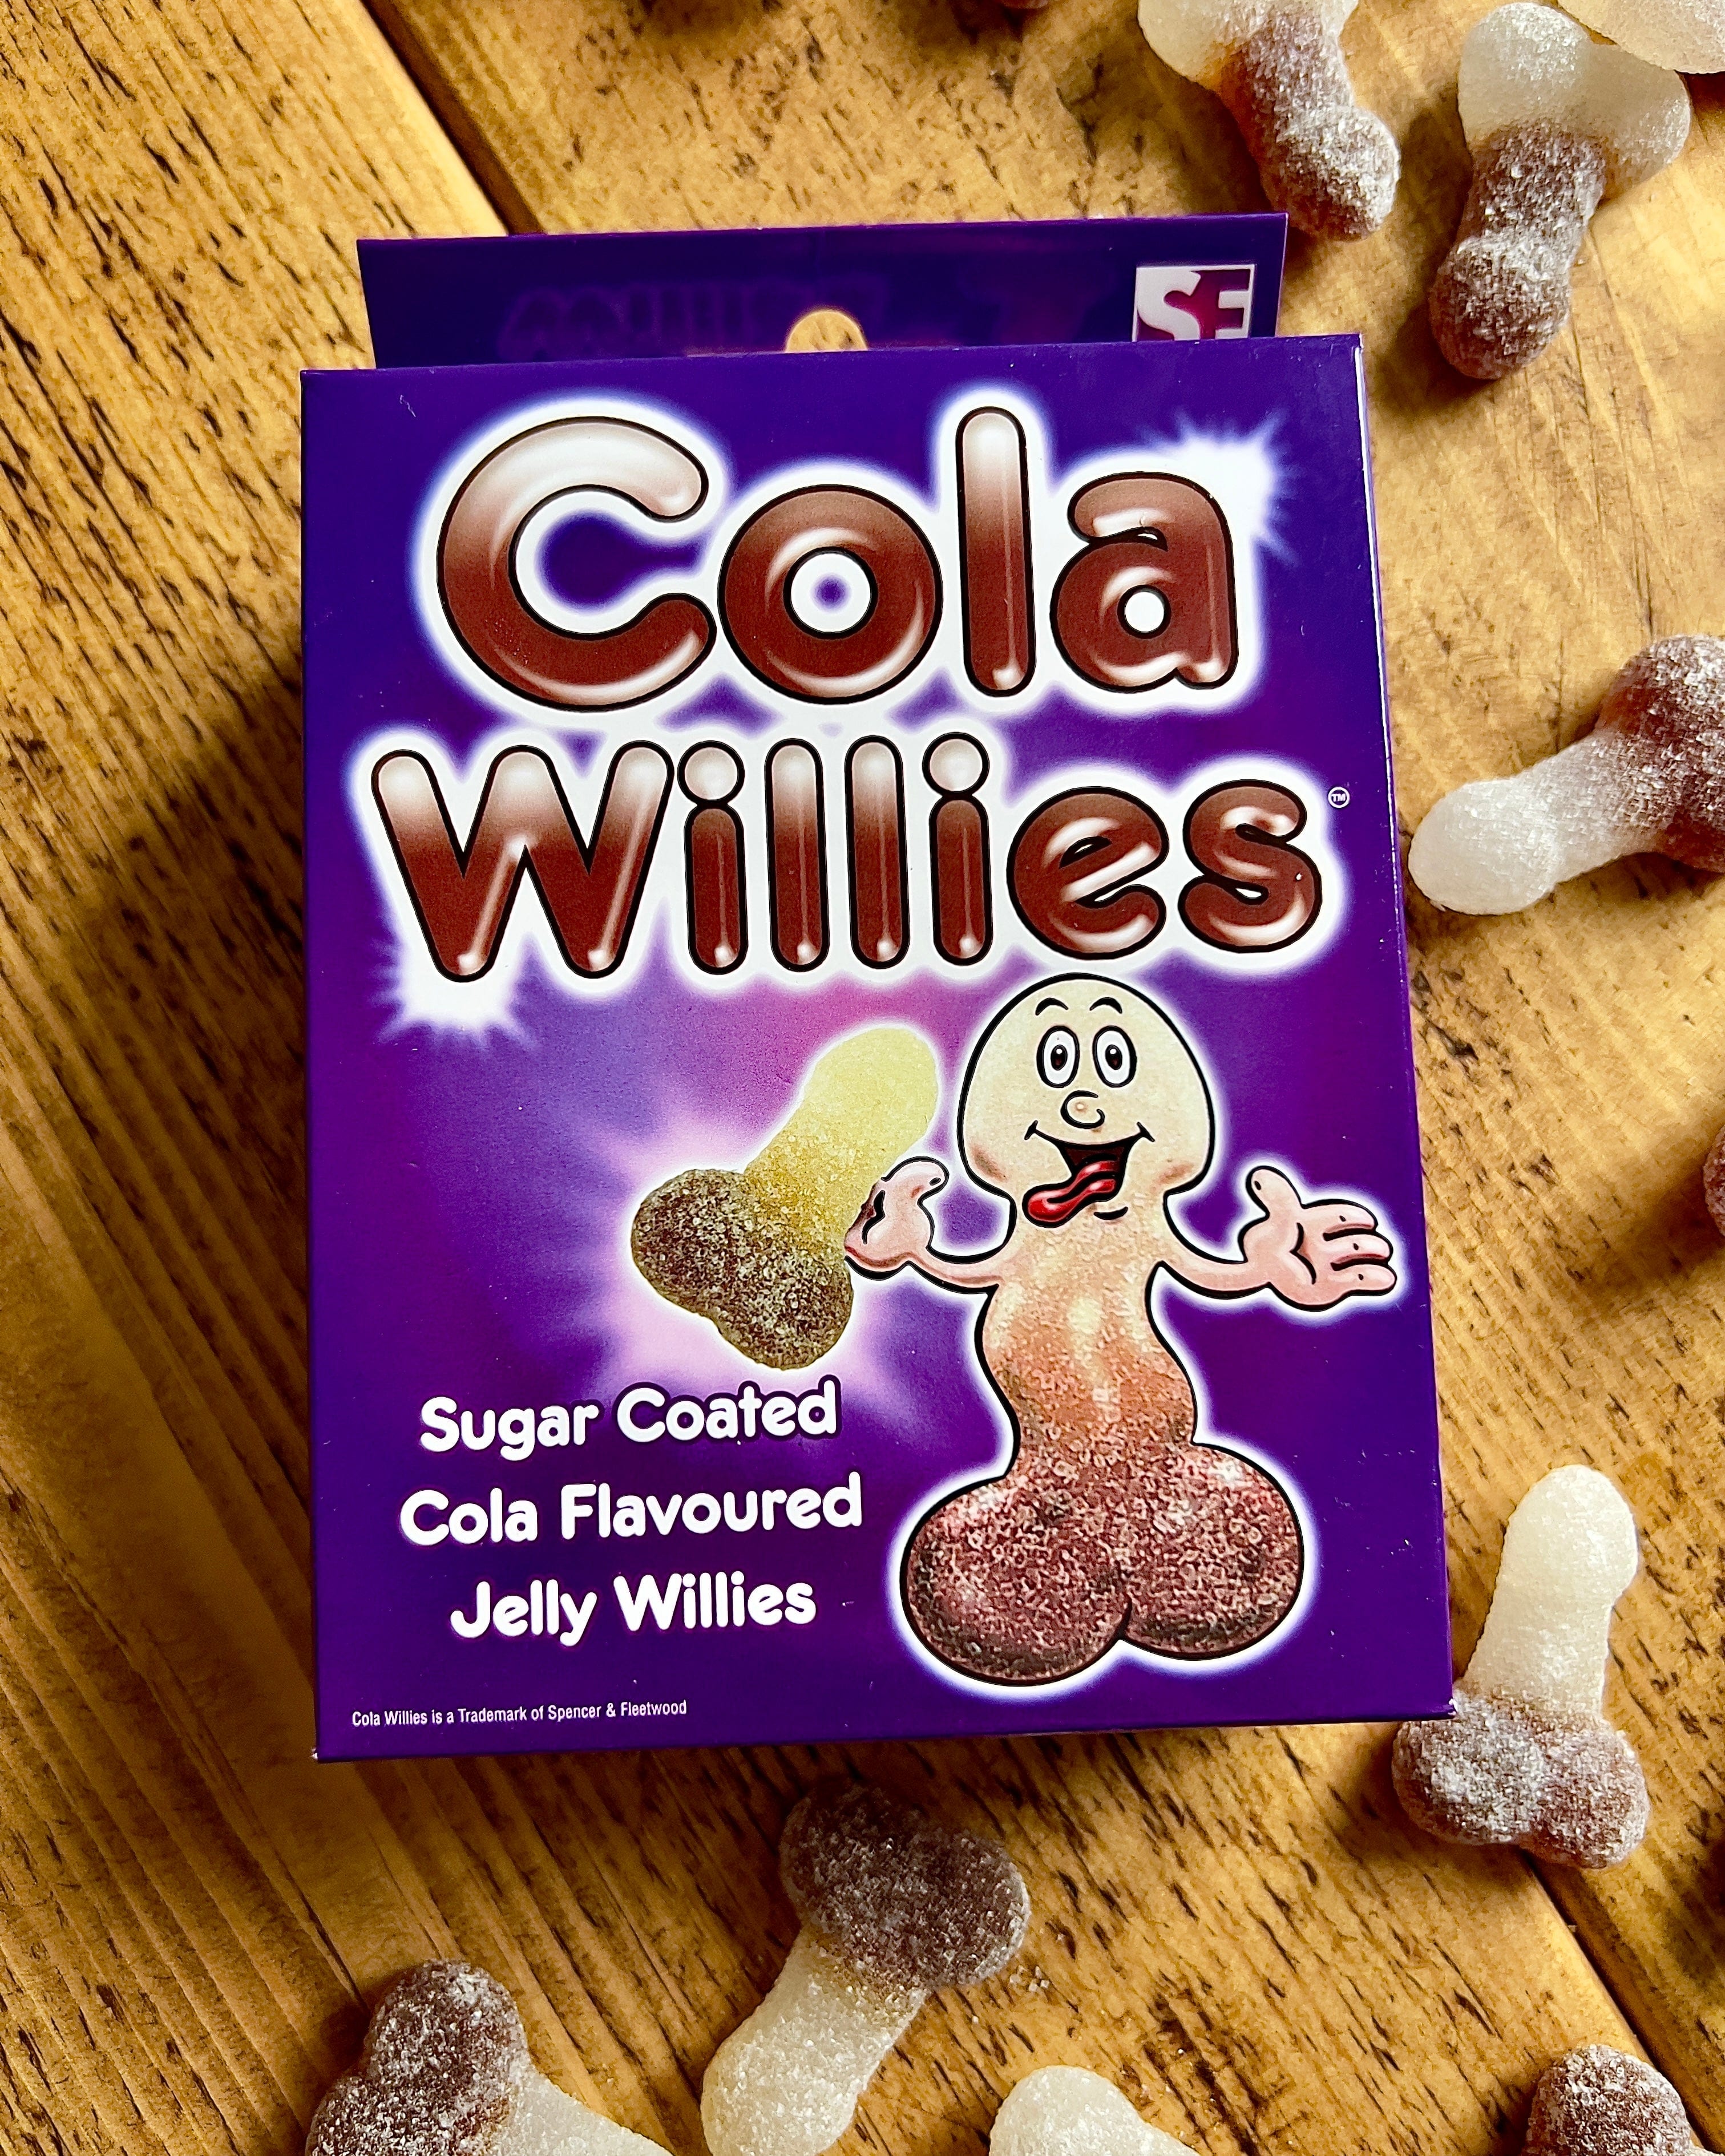 Cola willies - close up of the box